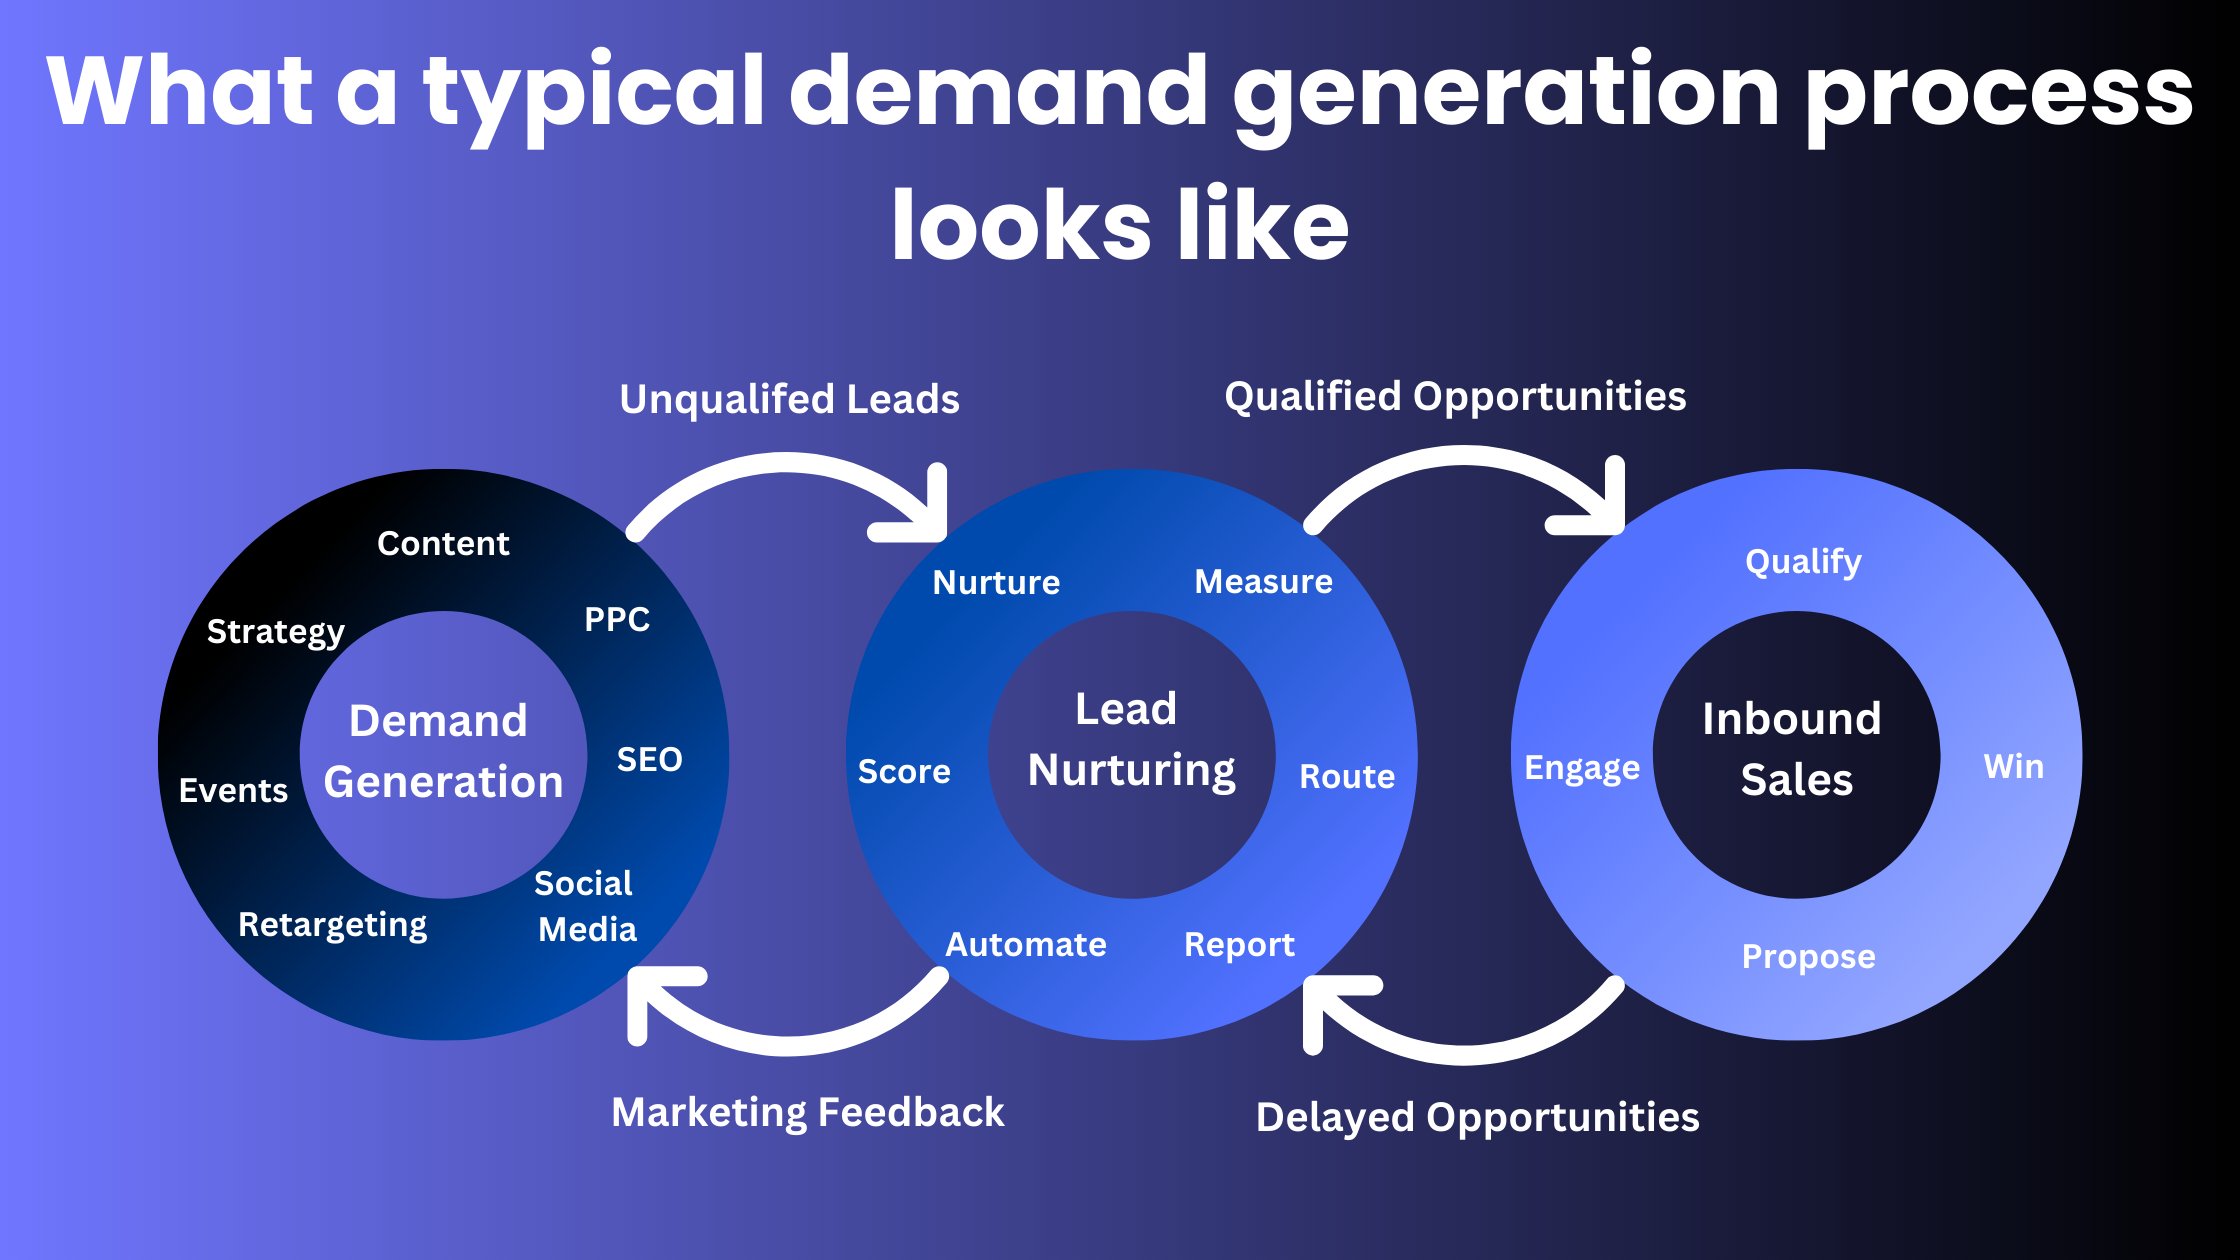 What a typical demand generation process looks like